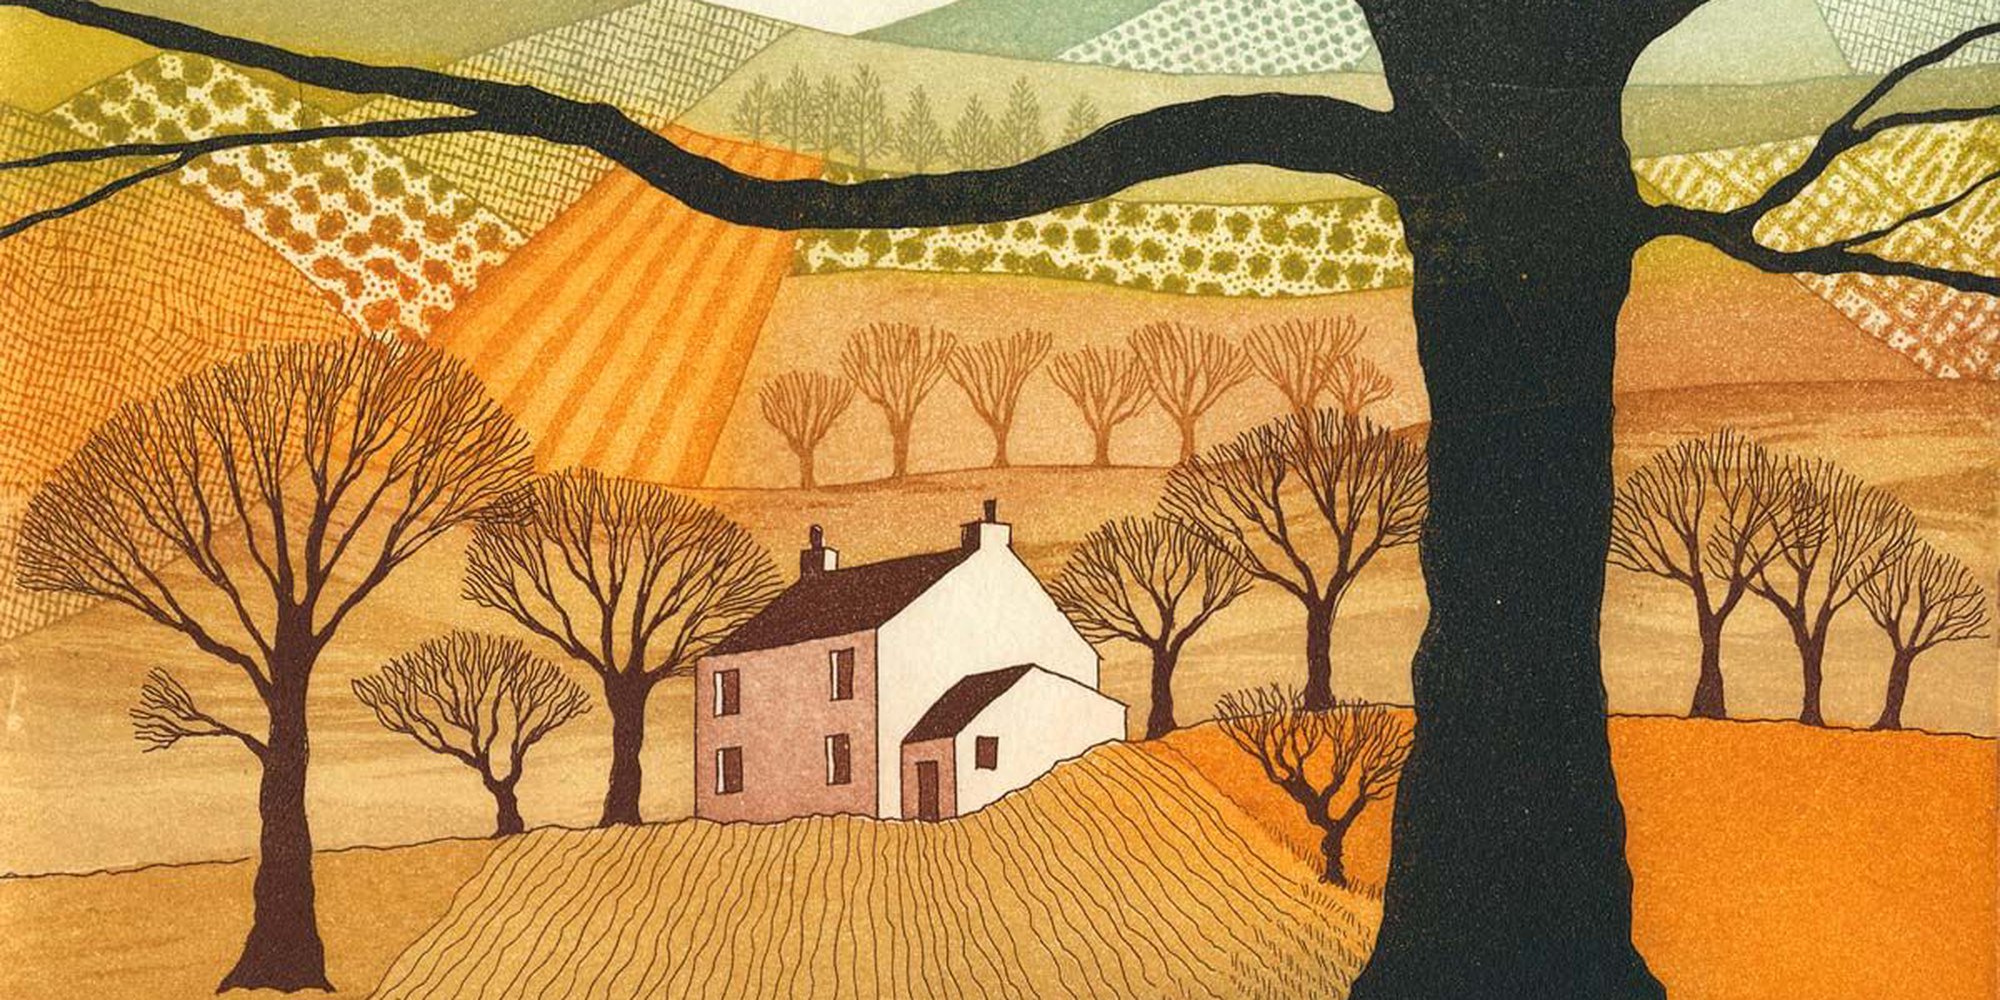 Art of the Day: "Safely Gathered In" by Rebecca Vincent